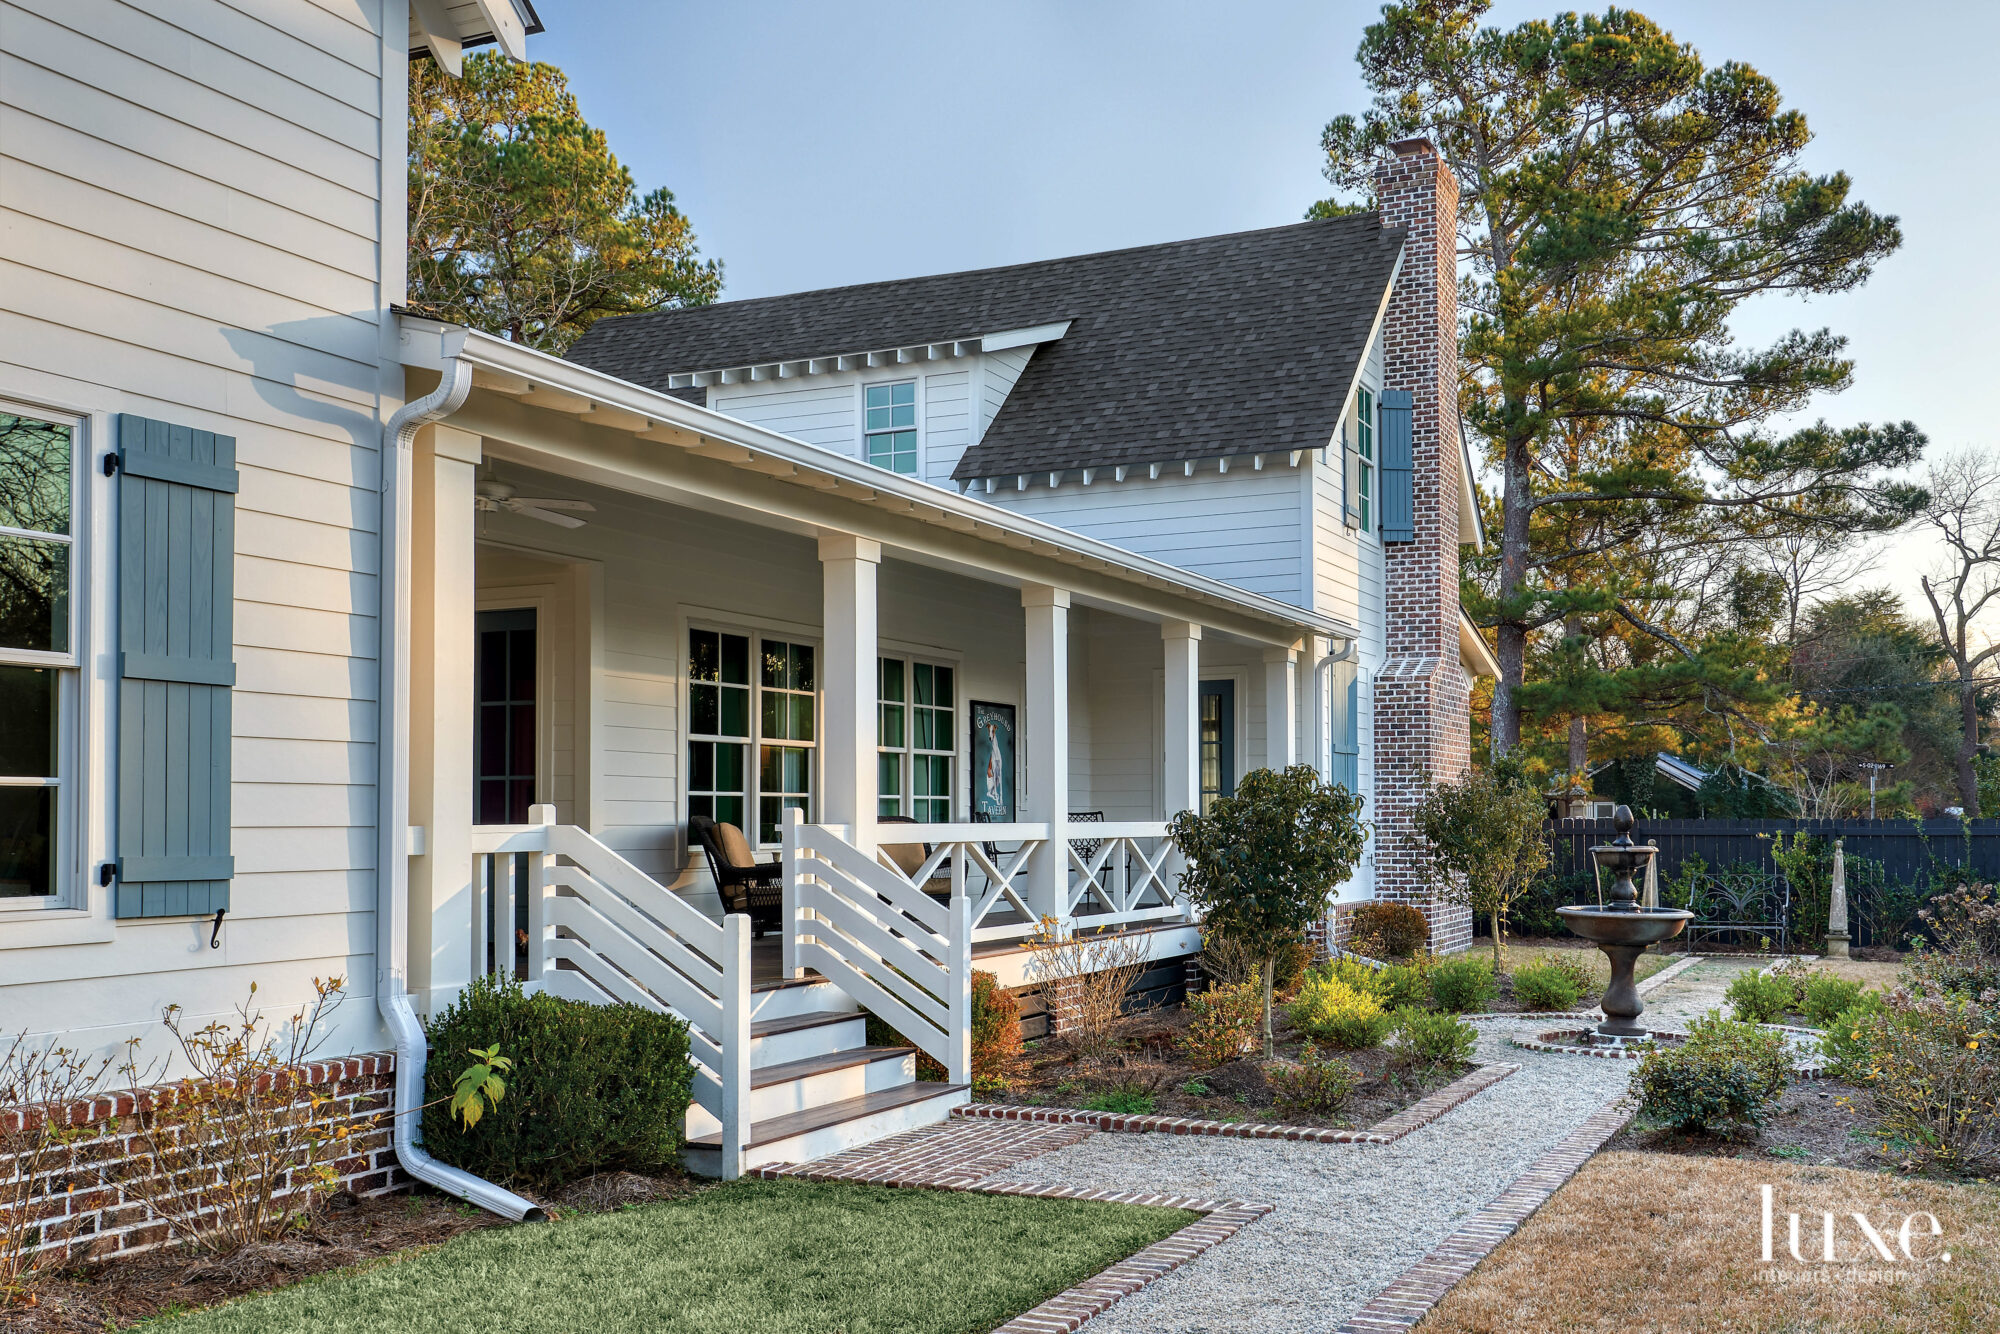 House exterior, porch, garden paths, sky and pine trees